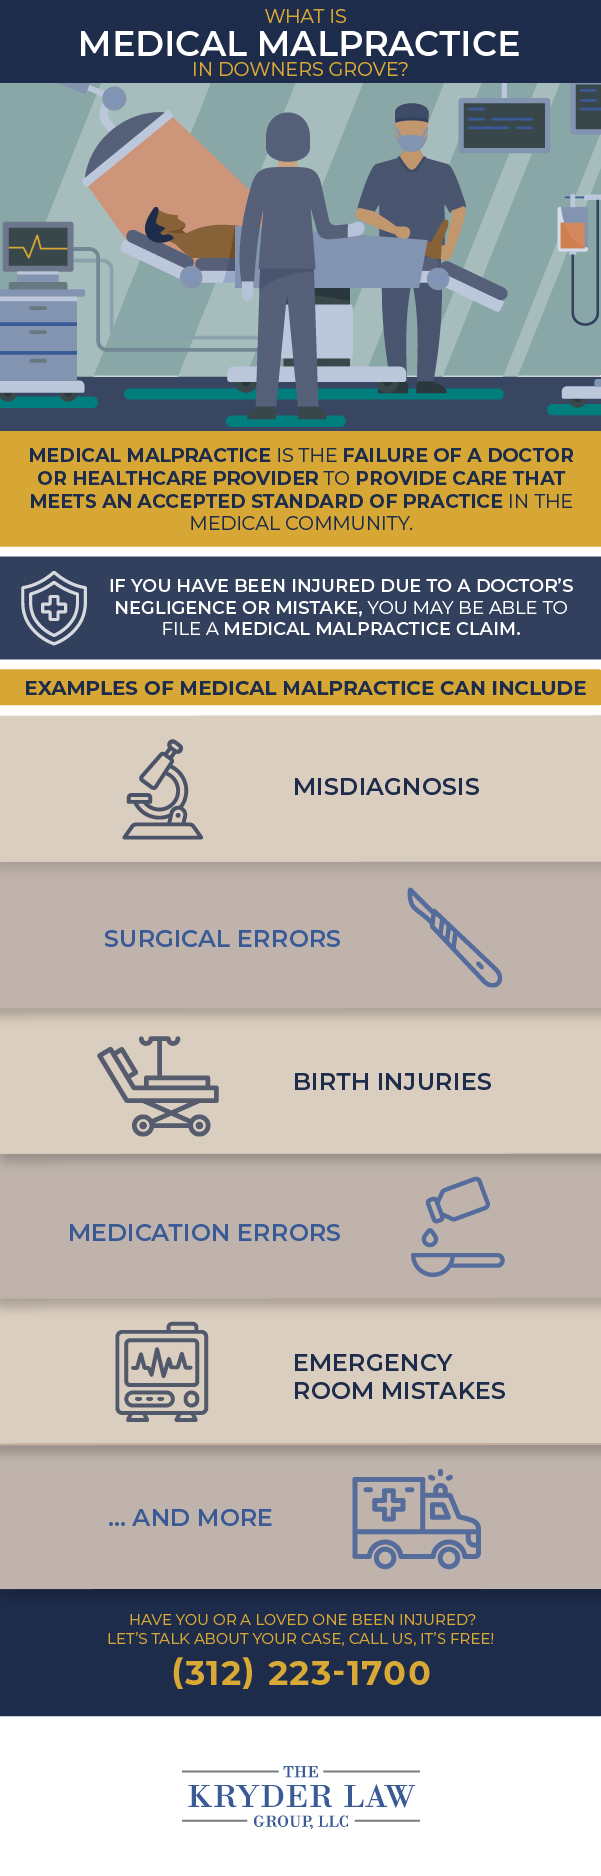 What is medical malpractice in Downers Grove?